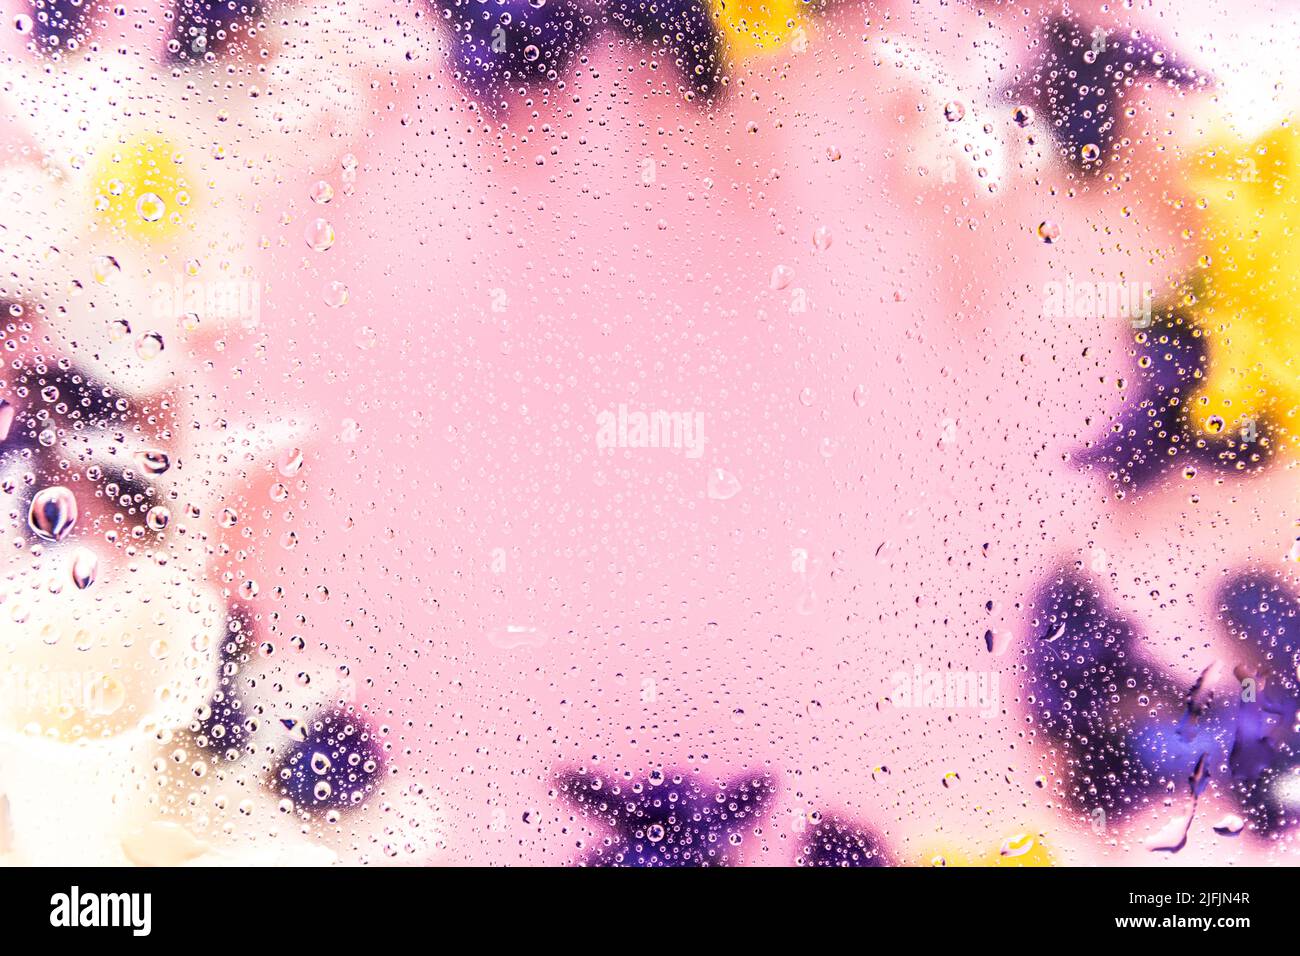 Floral background. Various daffodil flower heads, hyacinth blurred top view flat lay with water drops on the glass. Deep purple, pink, white, yellow colors. Copy space for text. High quality photo Stock Photo